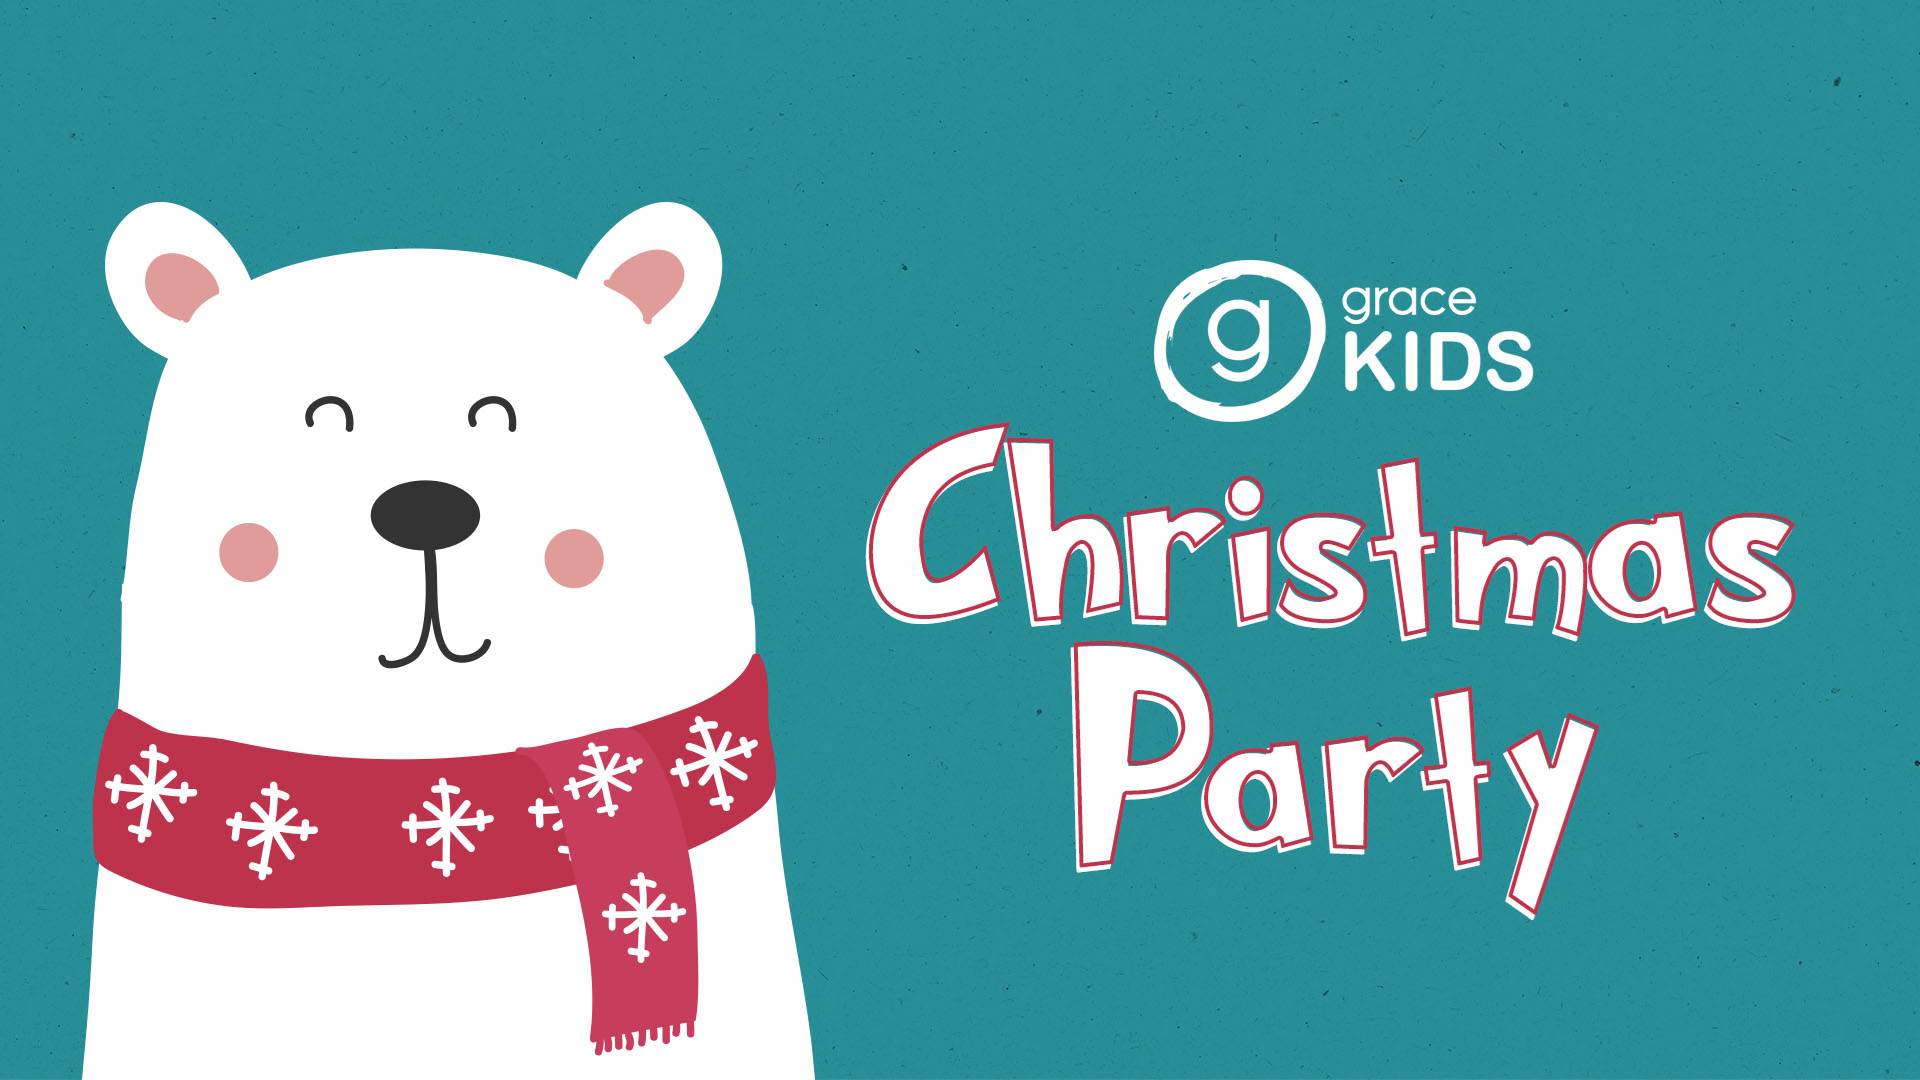 Link to Grace KIDS Christmas Party detail page